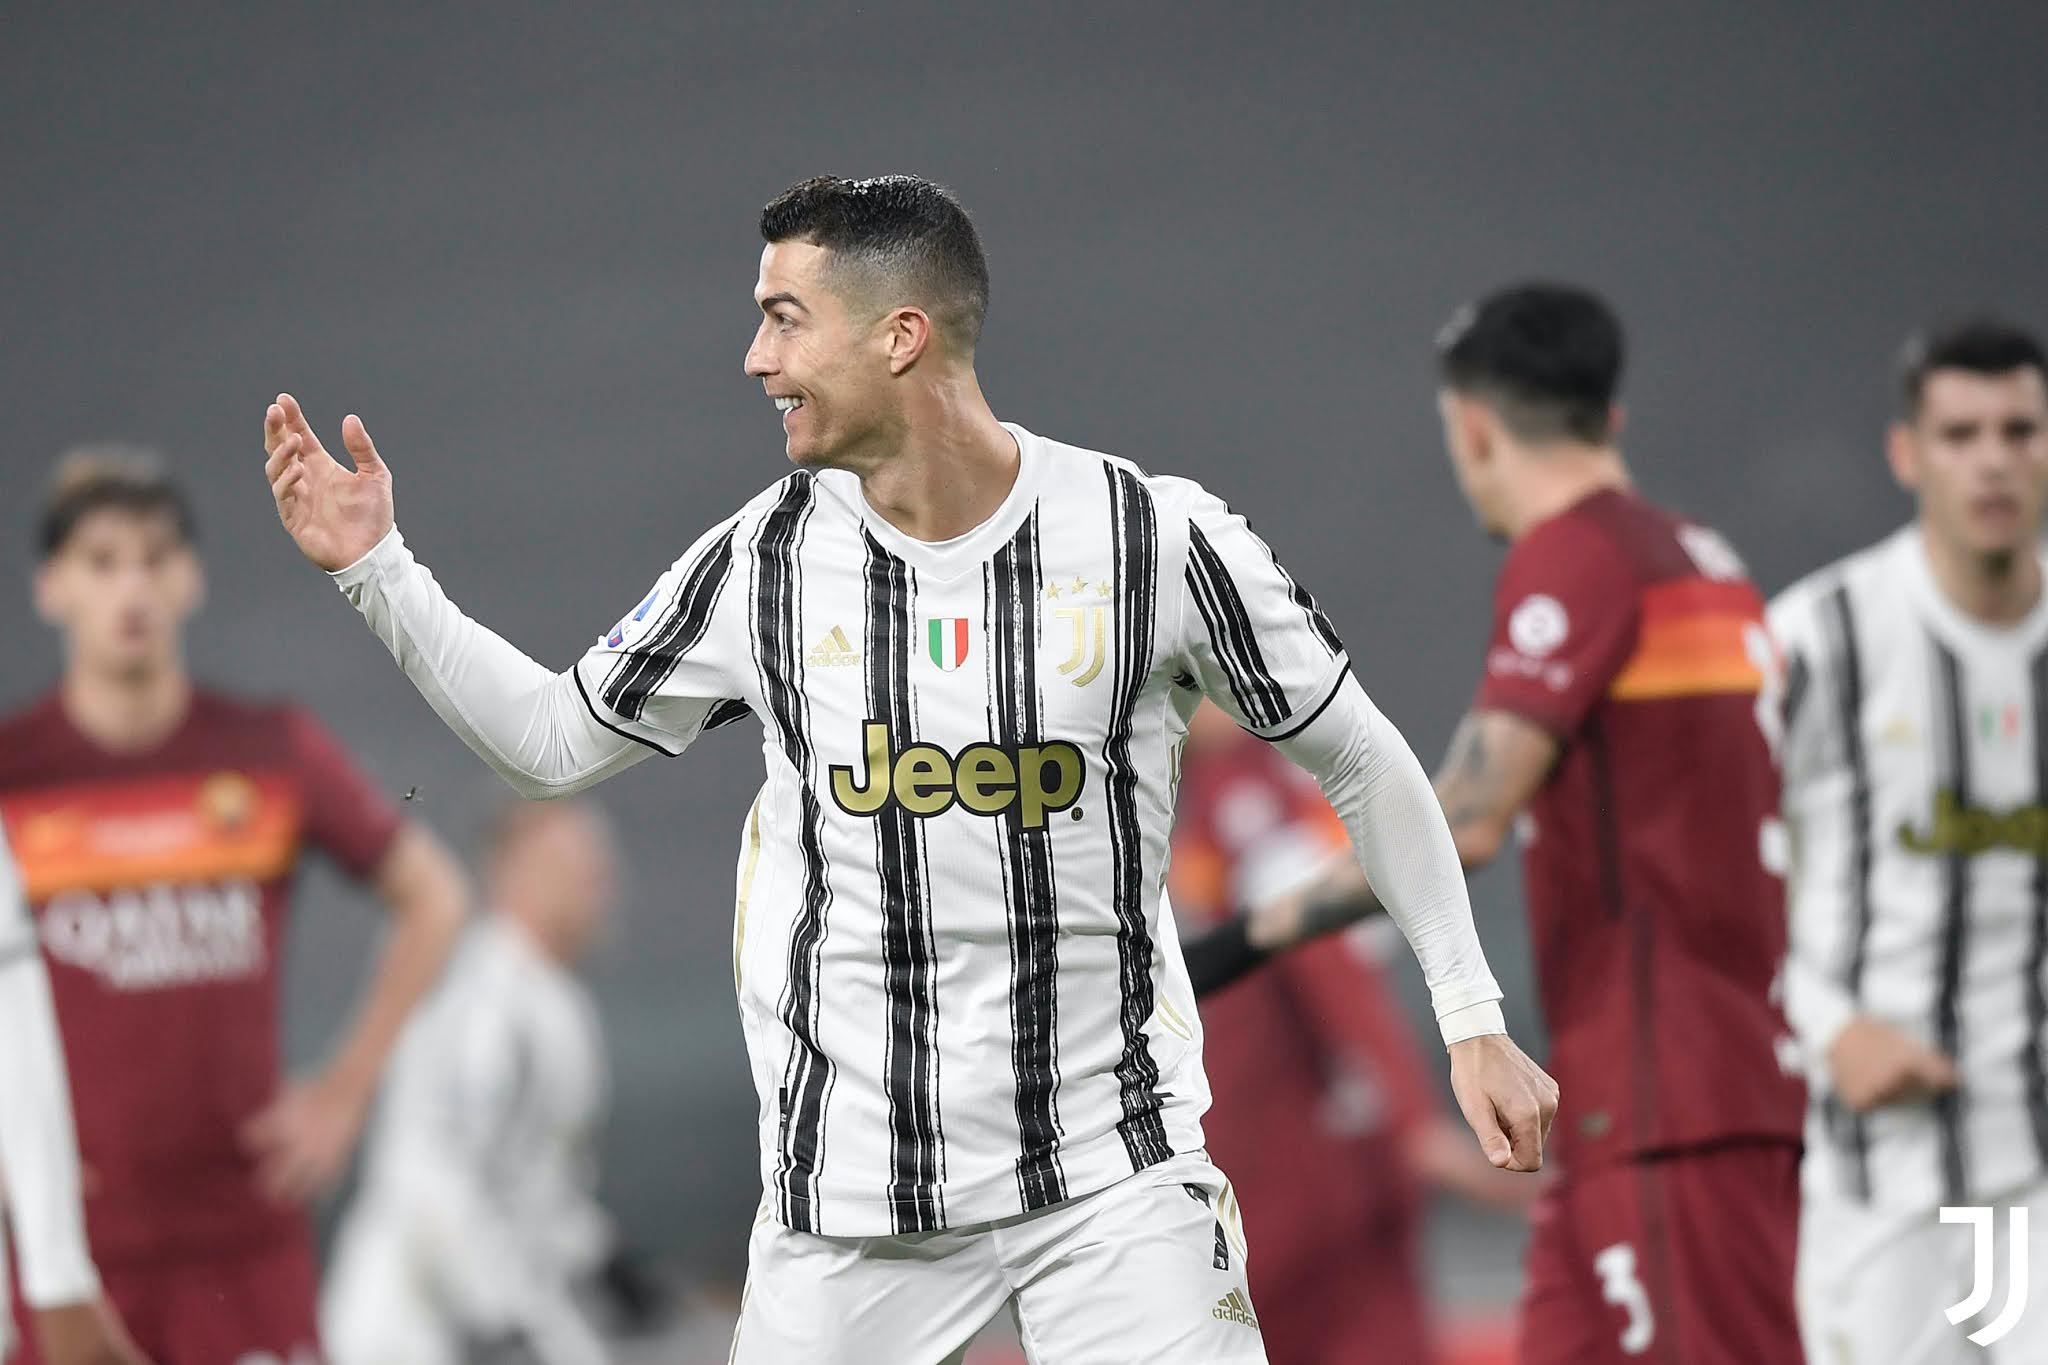 Cristiano Ronaldo's Juventus set their sights Napoli before making the trip to FC Porto in the UEFA Champions League